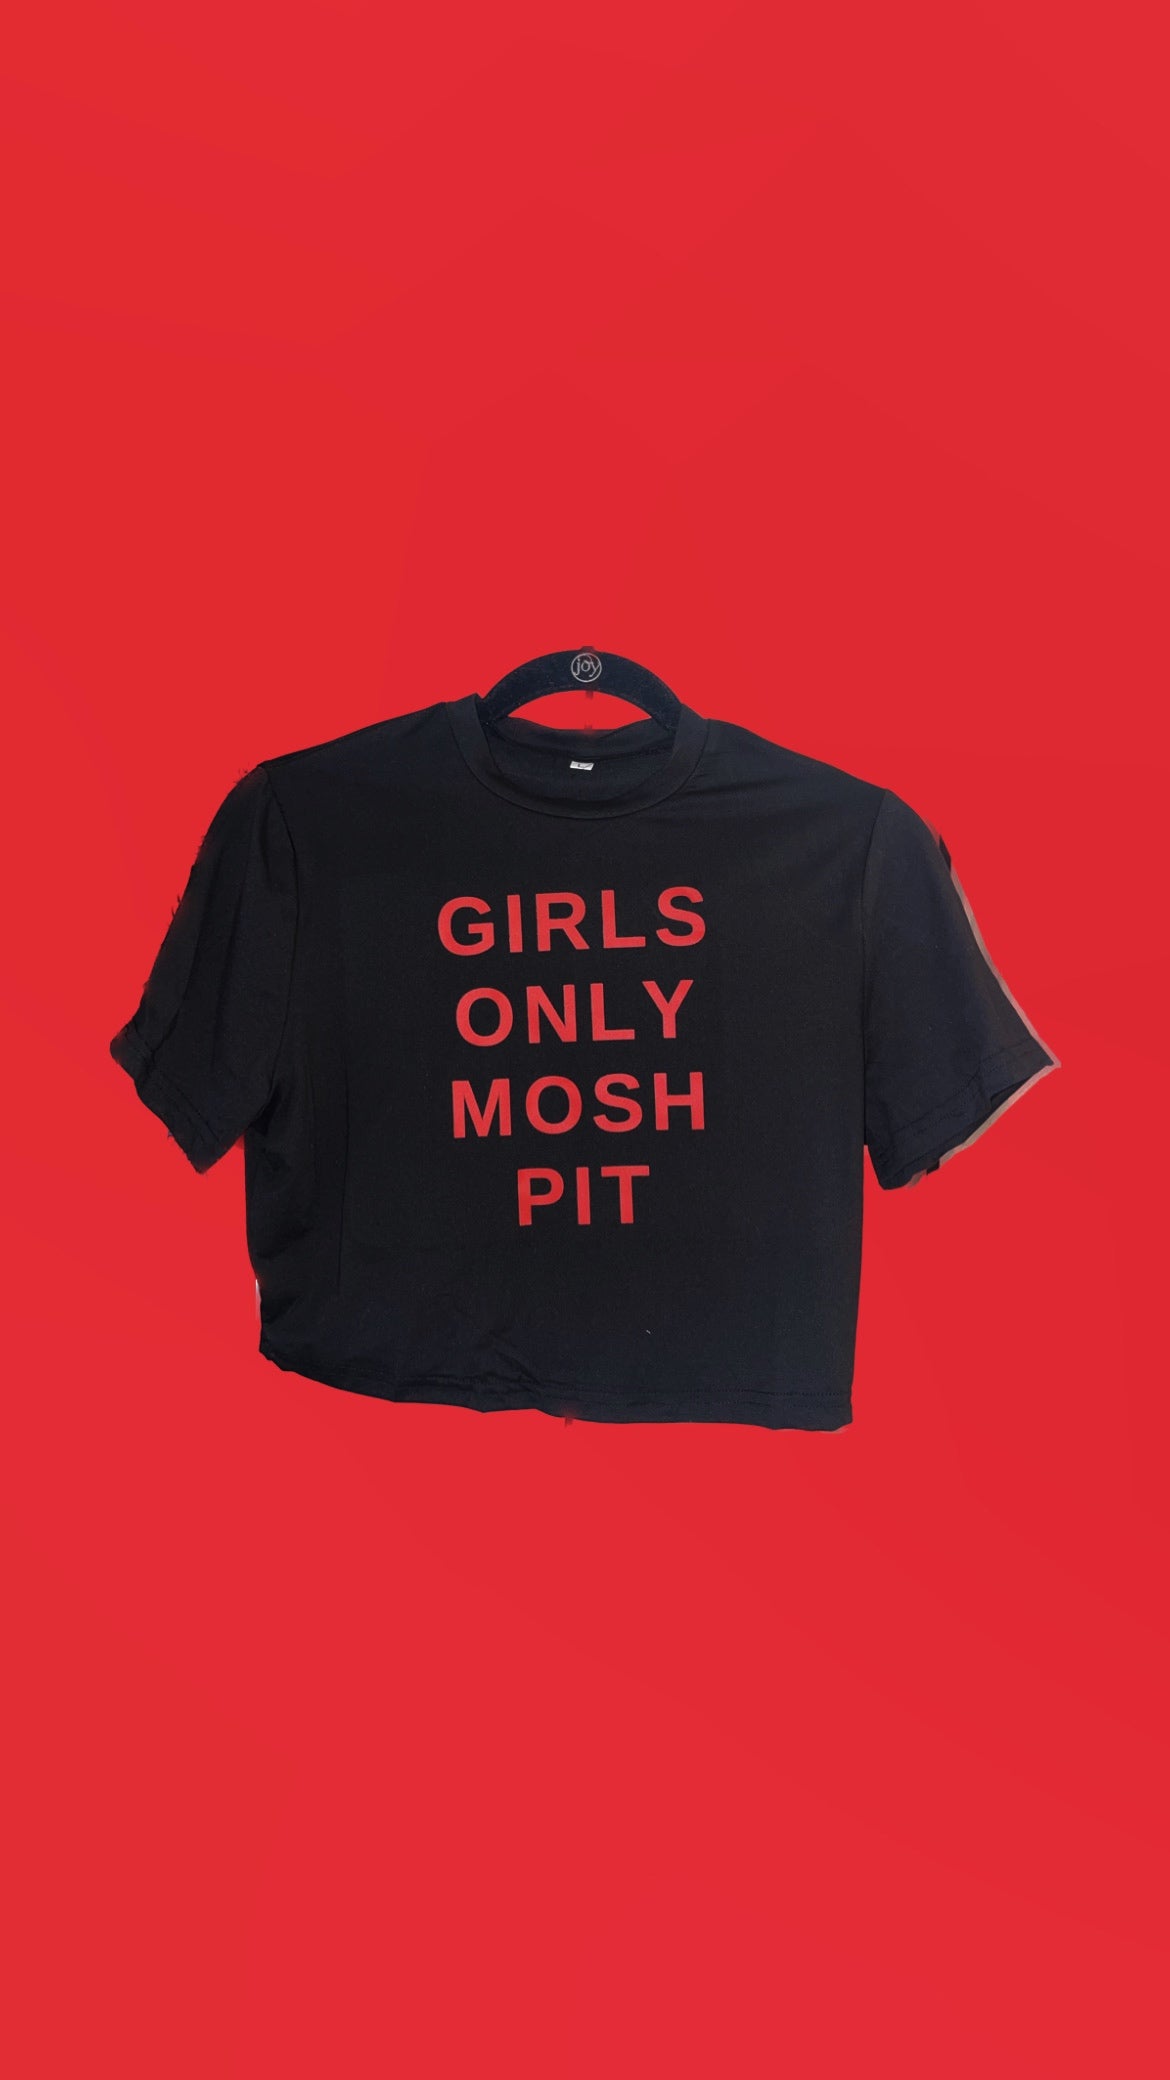 Girls Only Mosh Pit tee